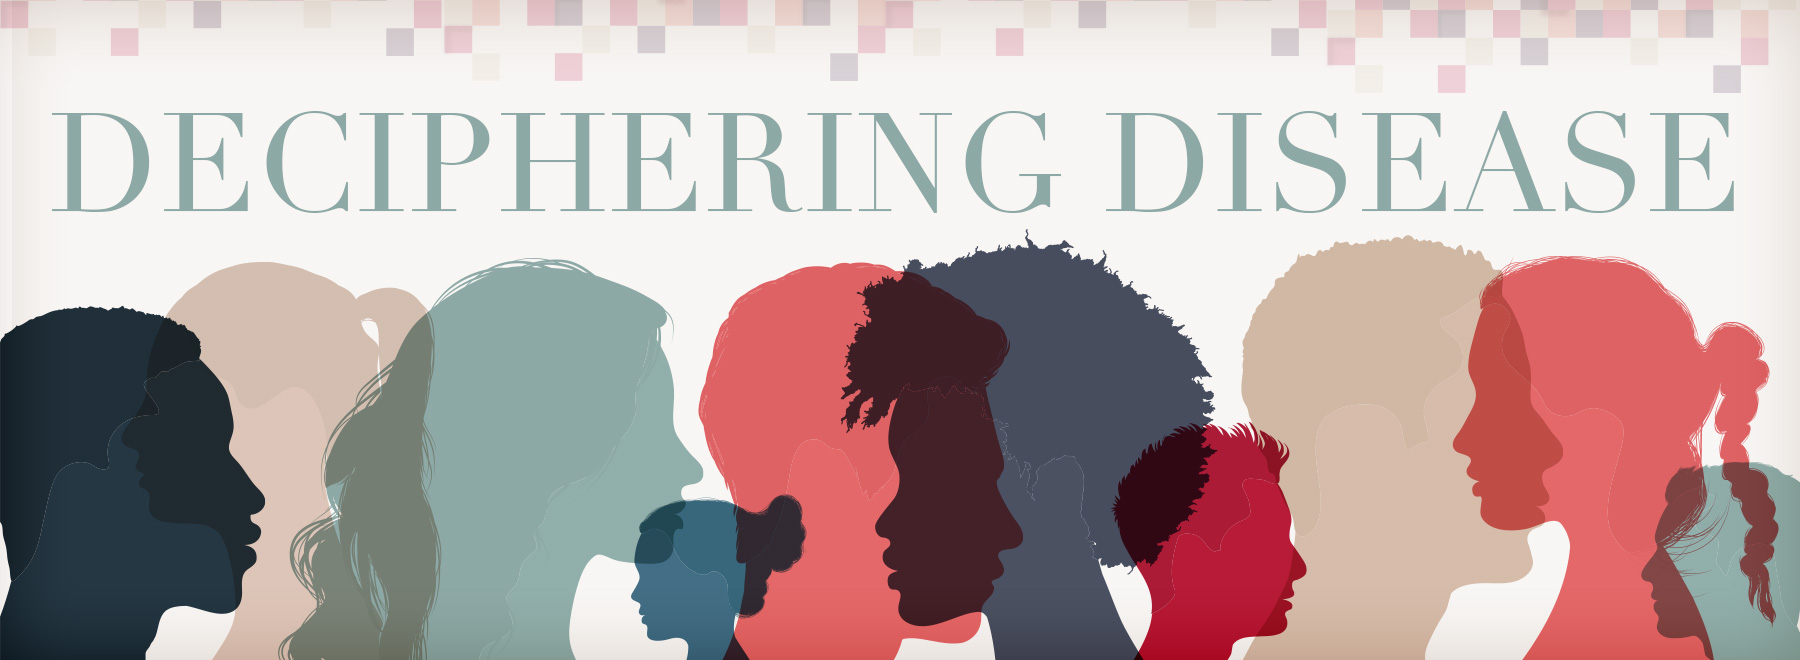 Illustration of diversity in colored profile silhouettes